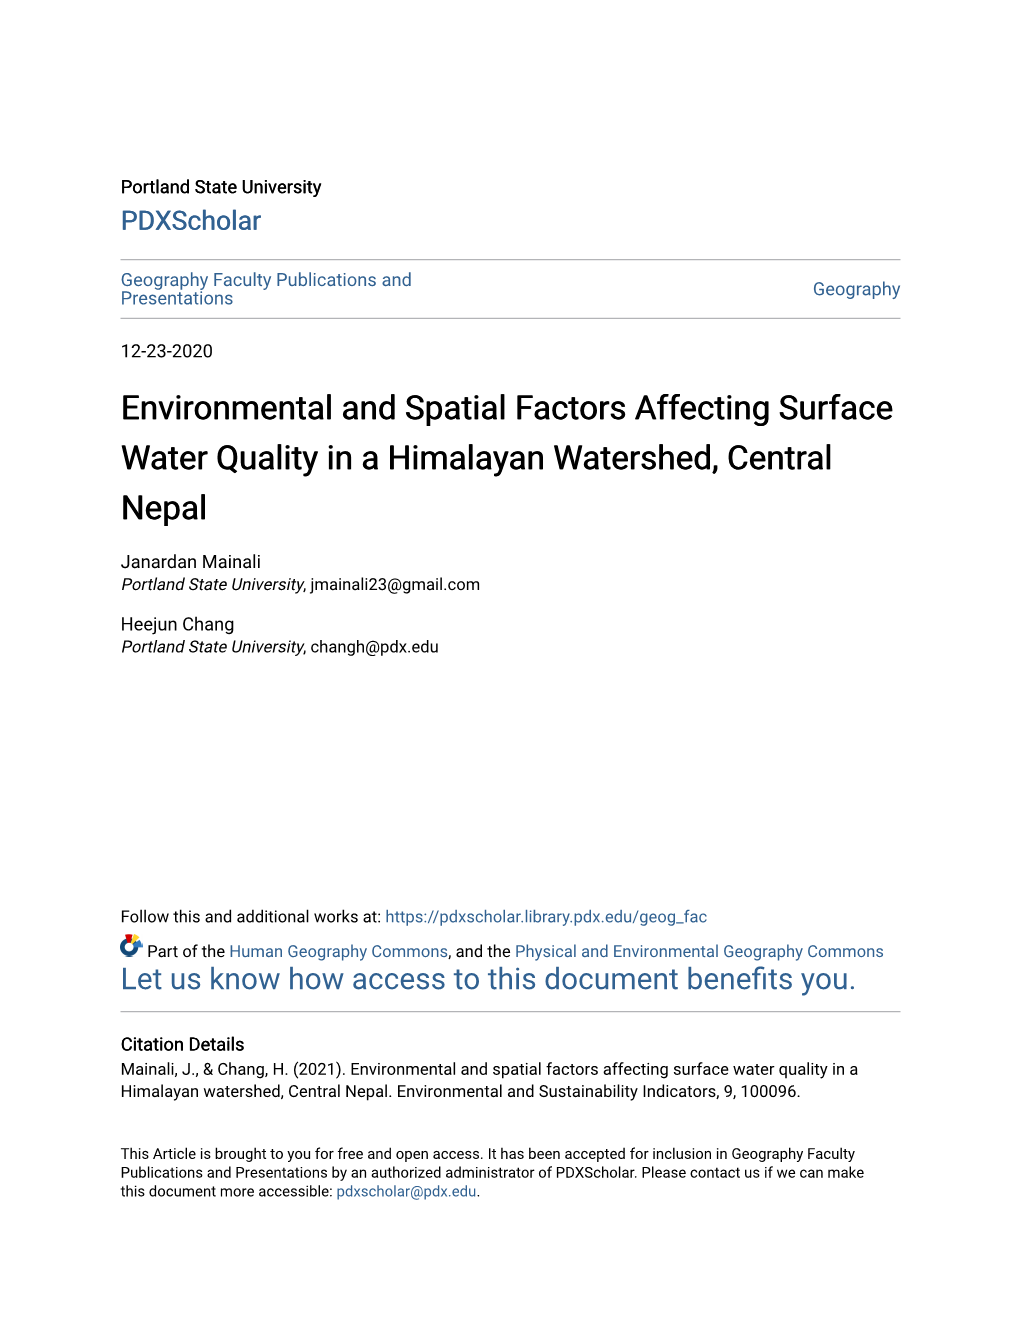 Environmental and Spatial Factors Affecting Surface Water Quality in a Himalayan Watershed, Central Nepal